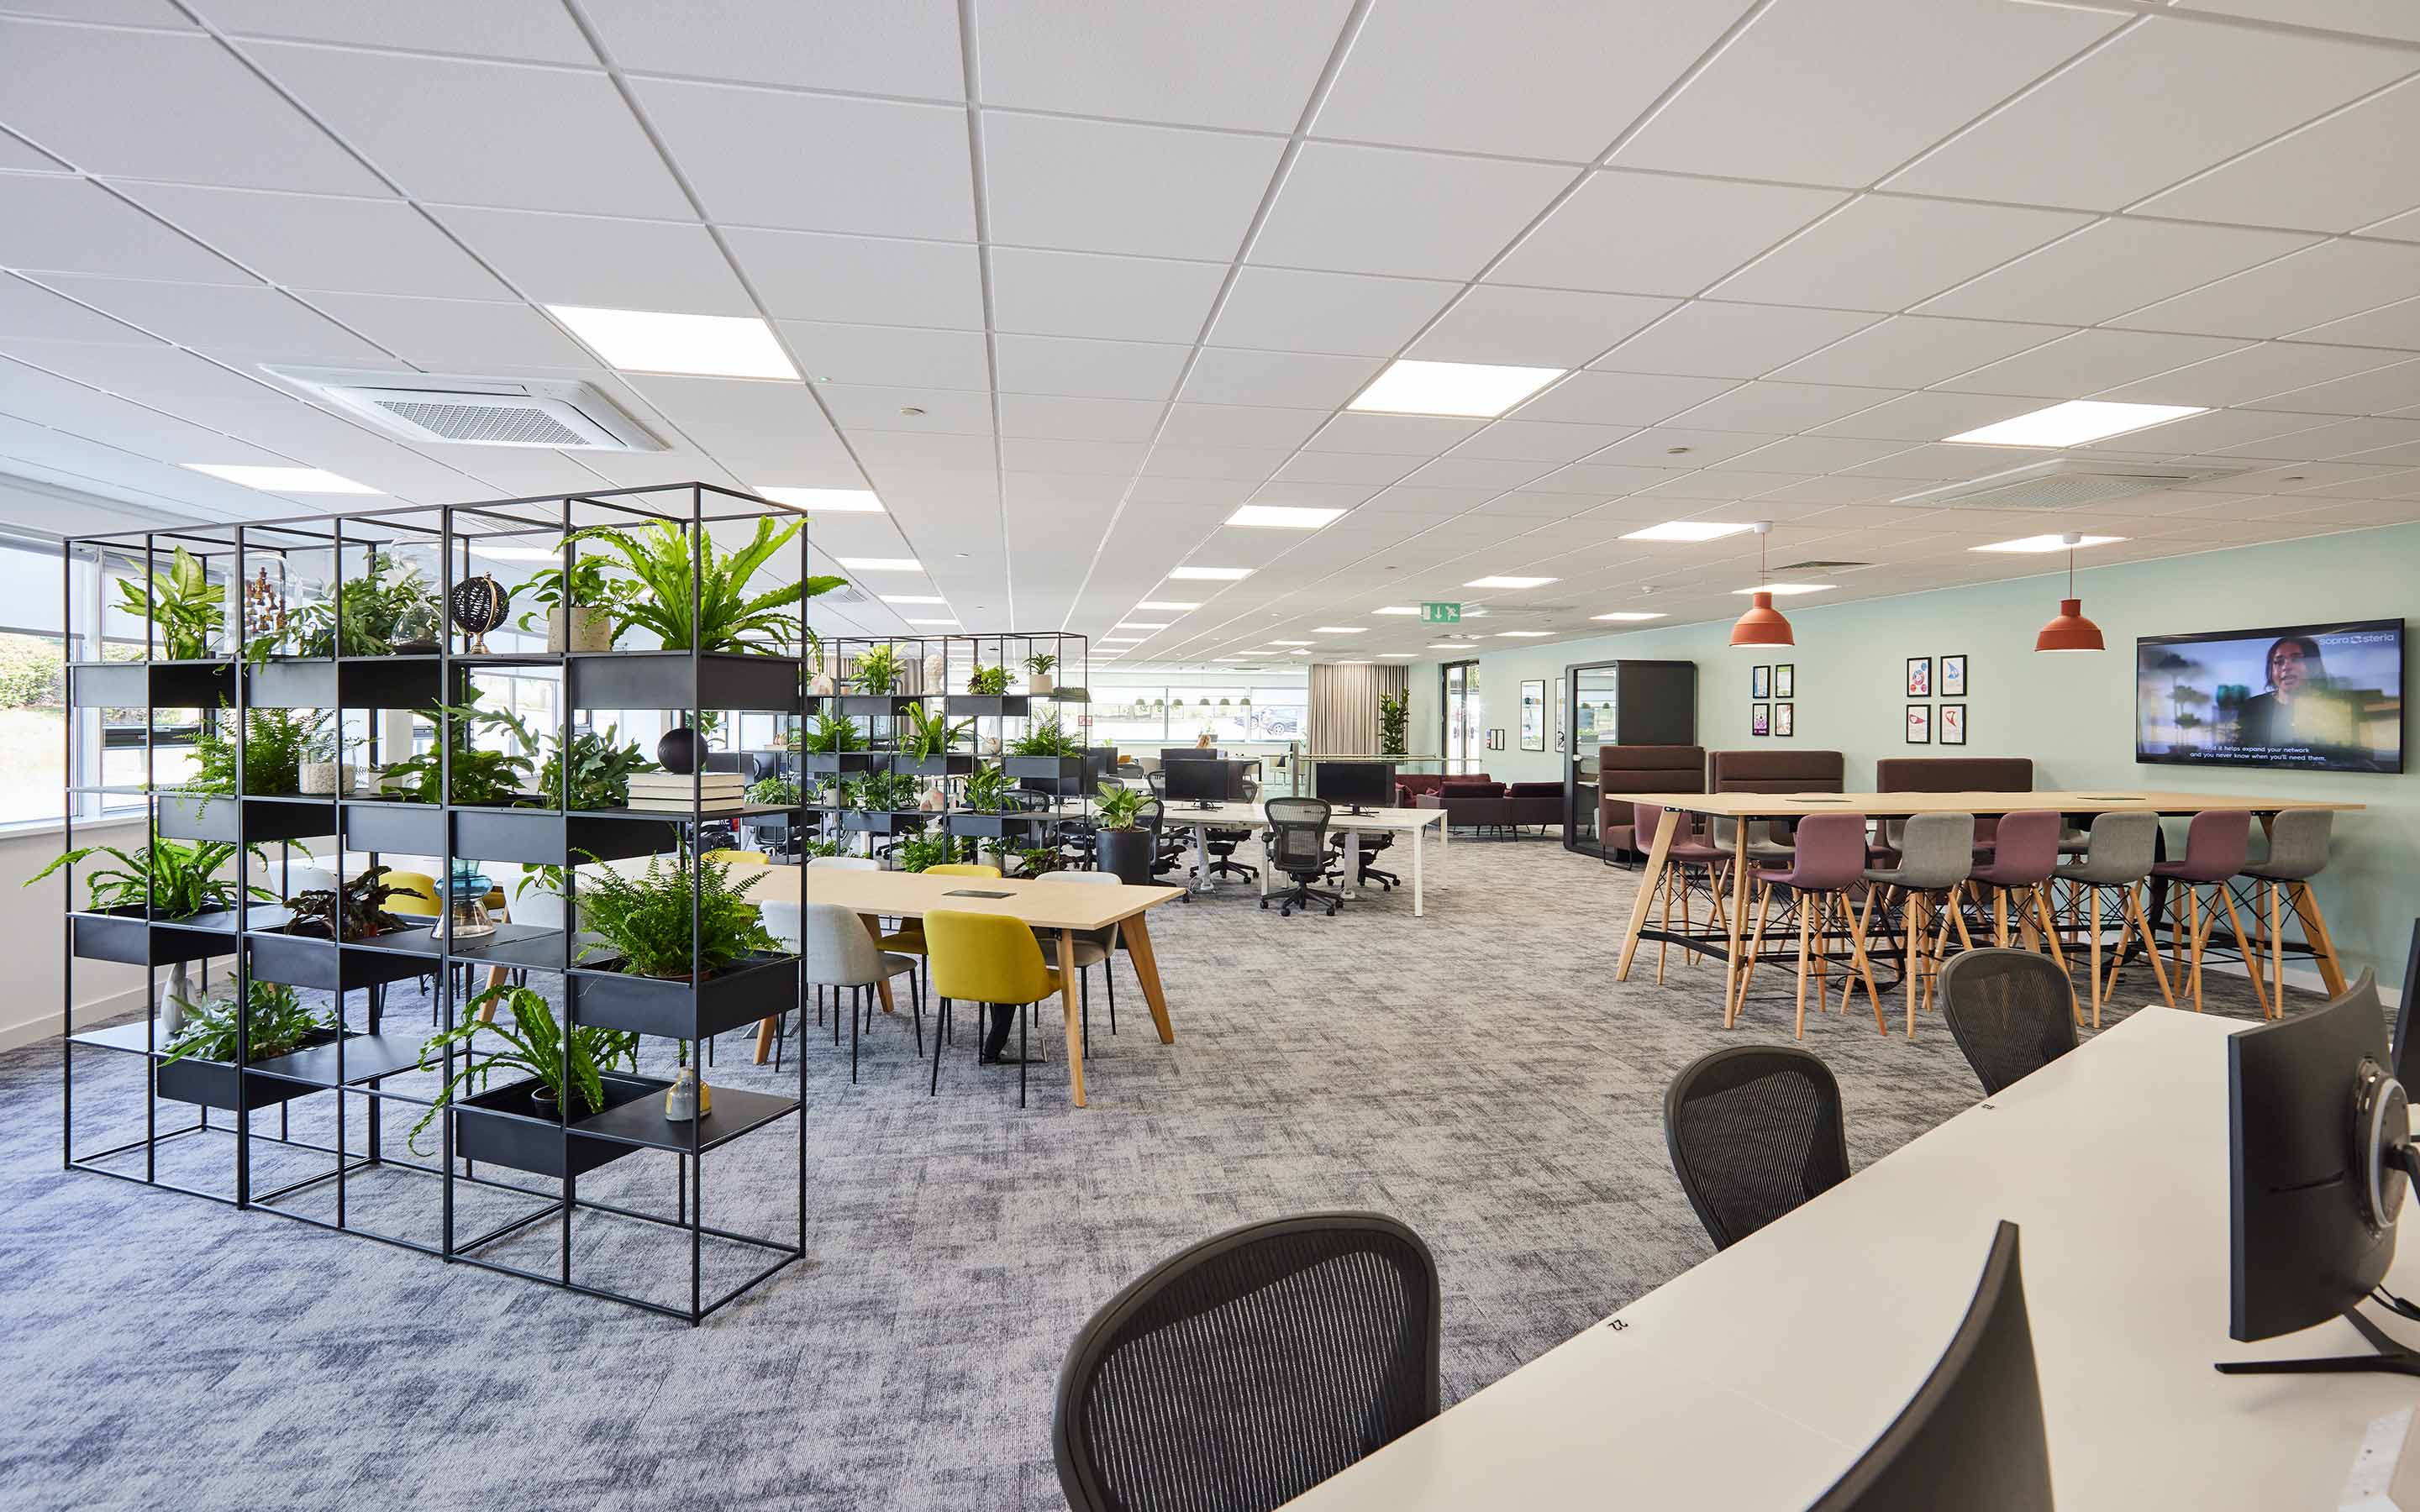 The view of an open plan office features desking, high table collaboration areas, planting on shelving units, and a soft grey carpet